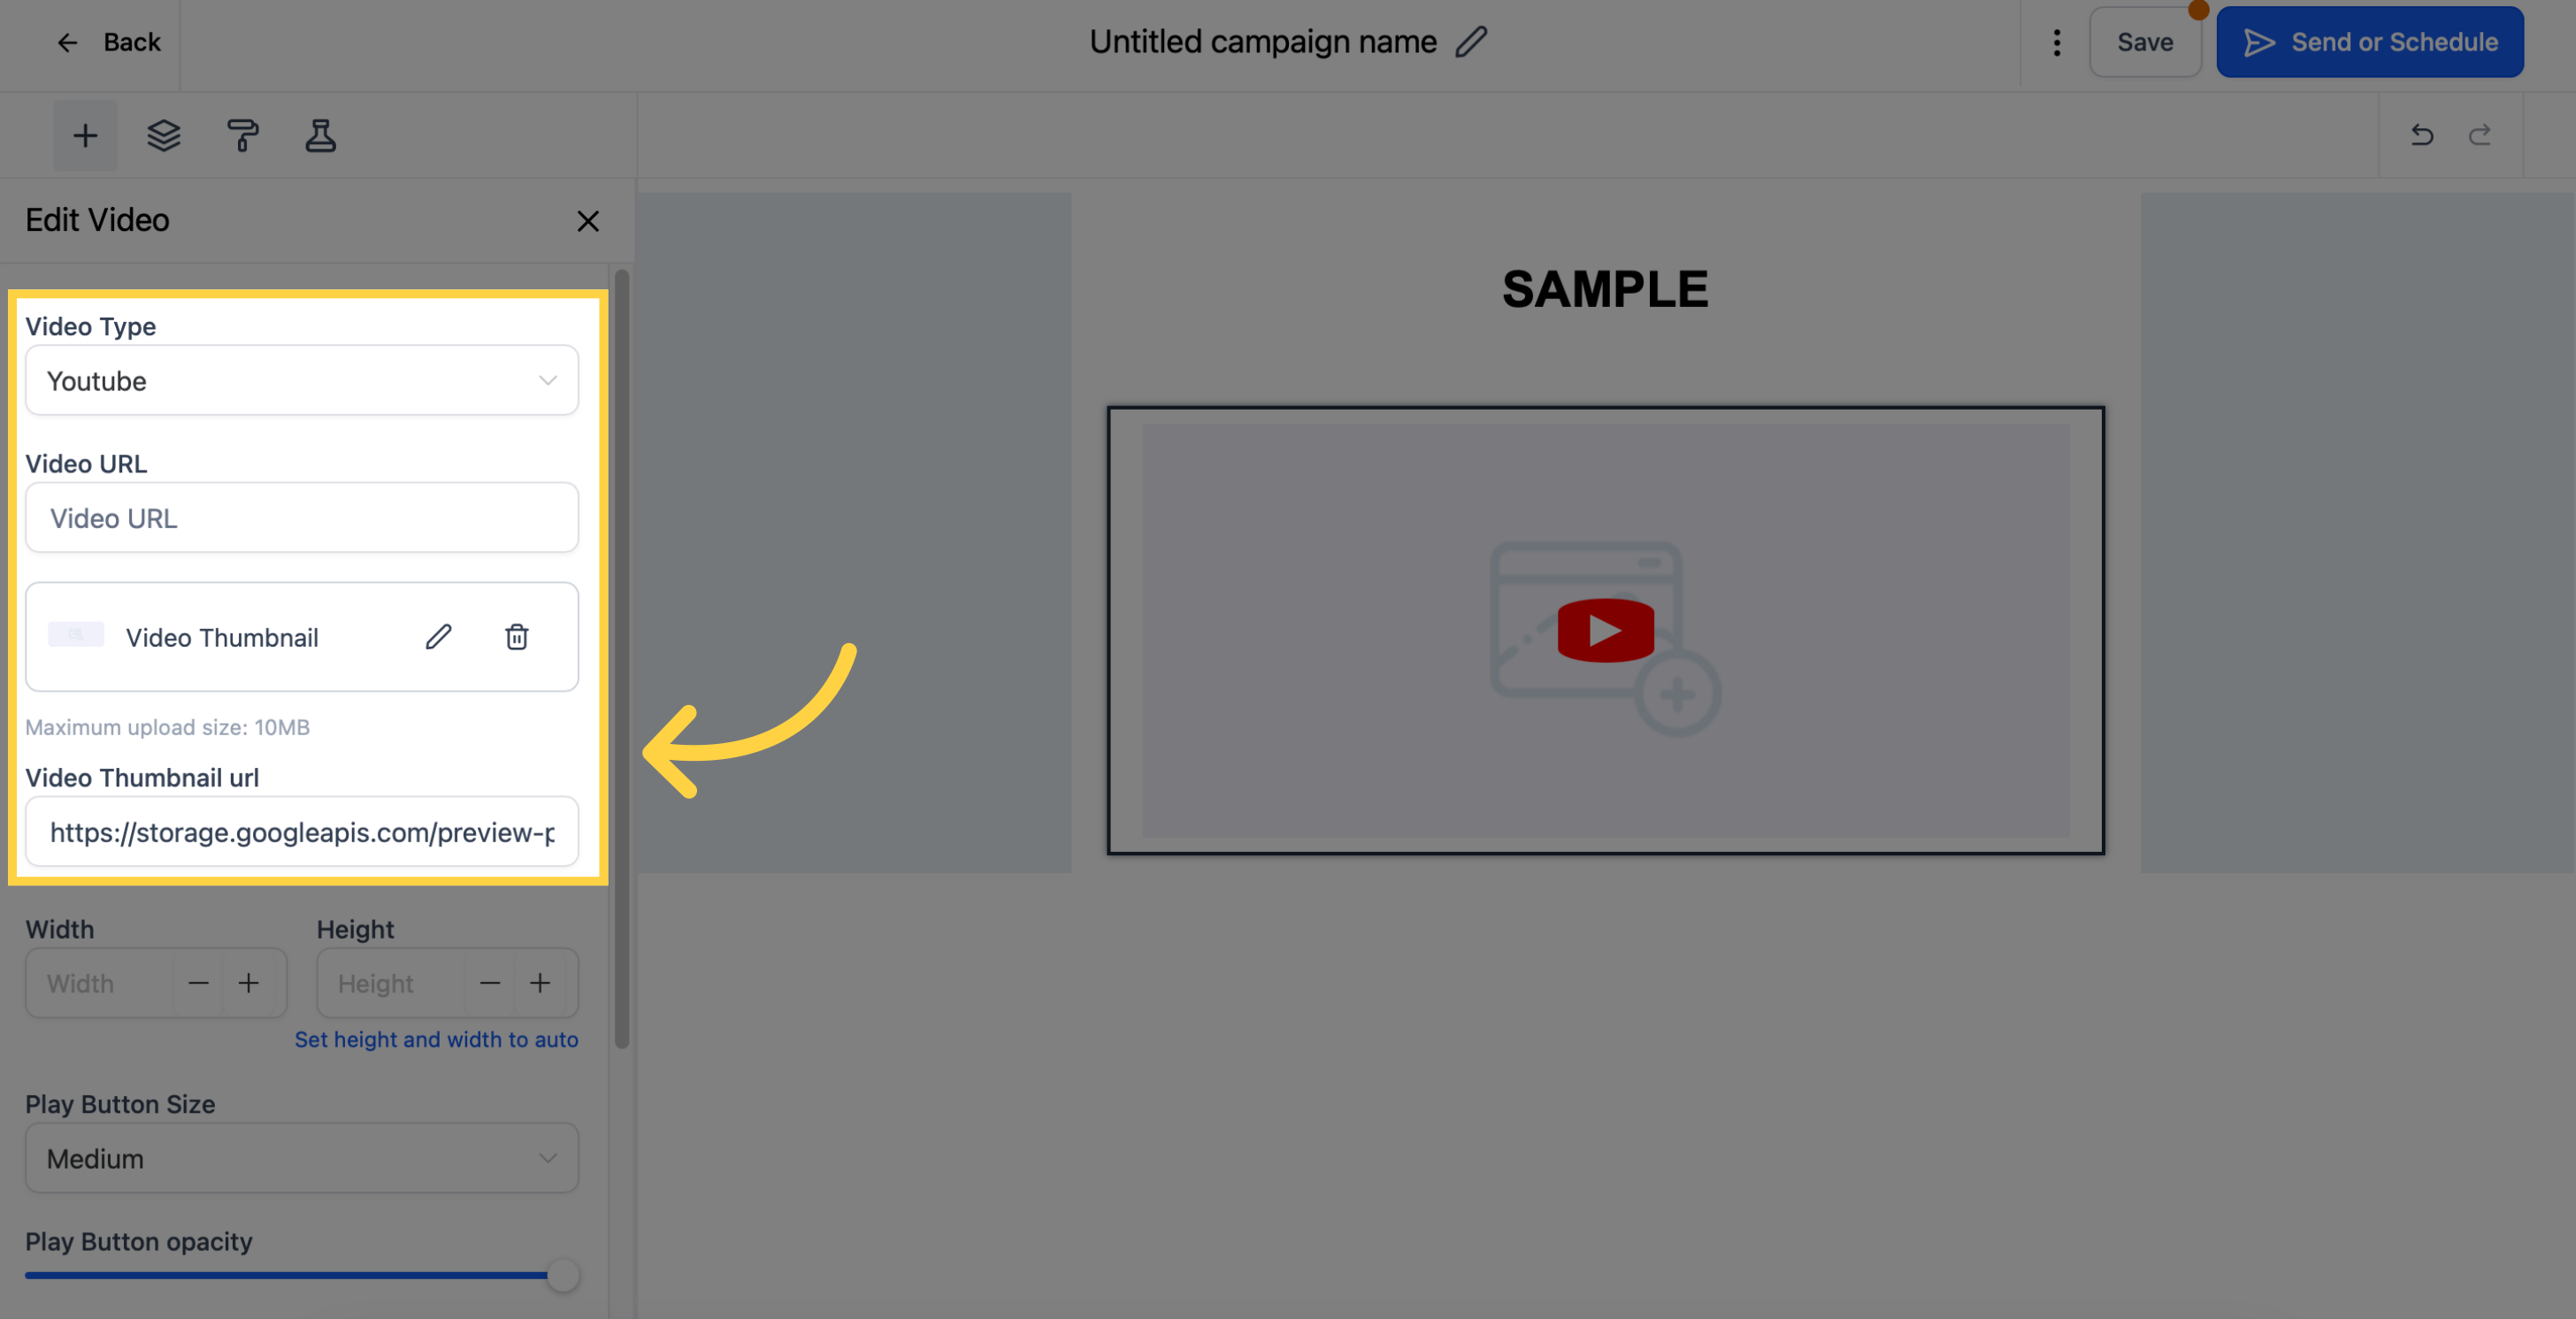 Customize video details